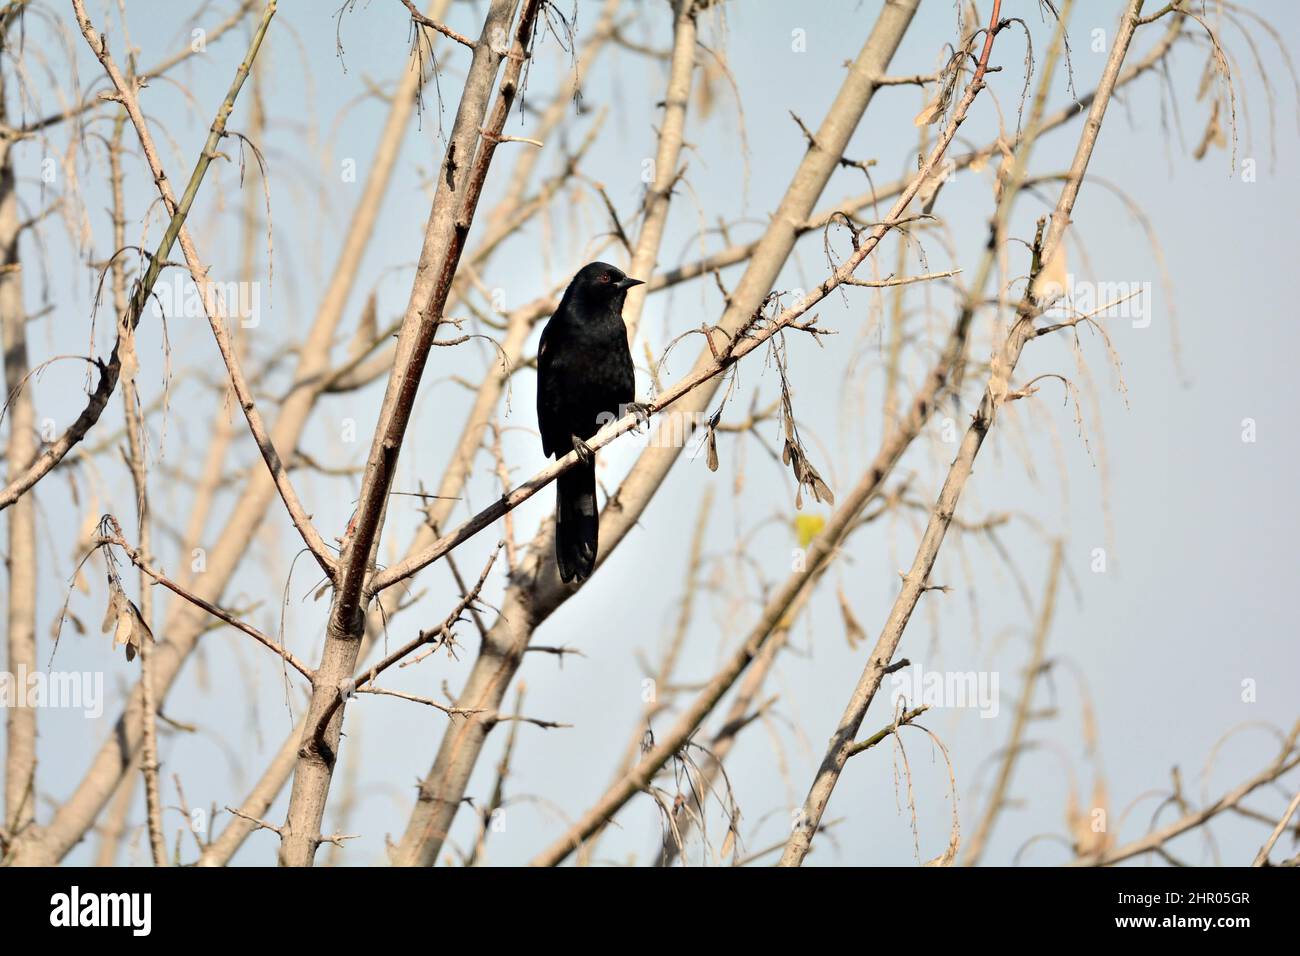 Variable Oriole (Icterus pyrrhopterus) on a branch, Costanera Sur Ecological Reserve, Buenos Aires, Argentina Stock Photo